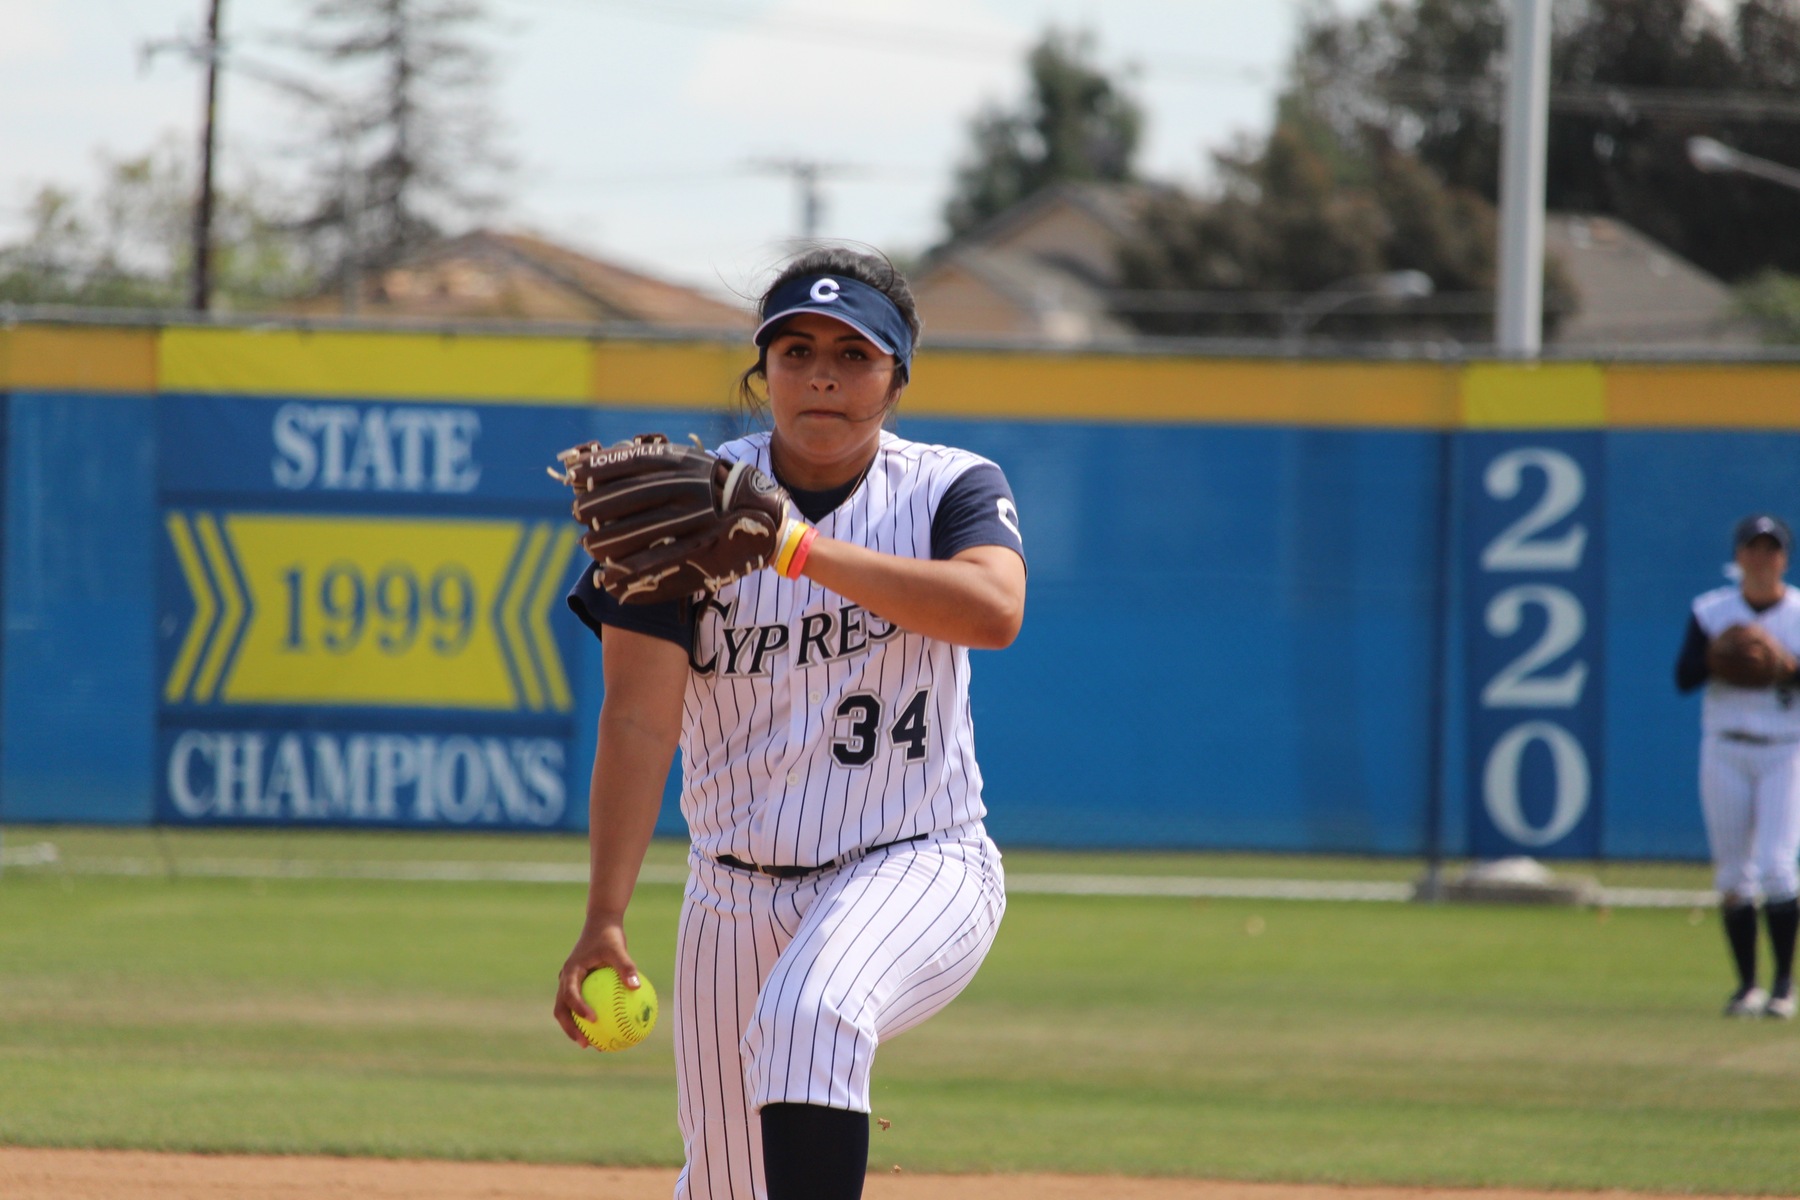 No. 2 Chargers Keep Streak Alive With Victory Over Gauchos, 4-2